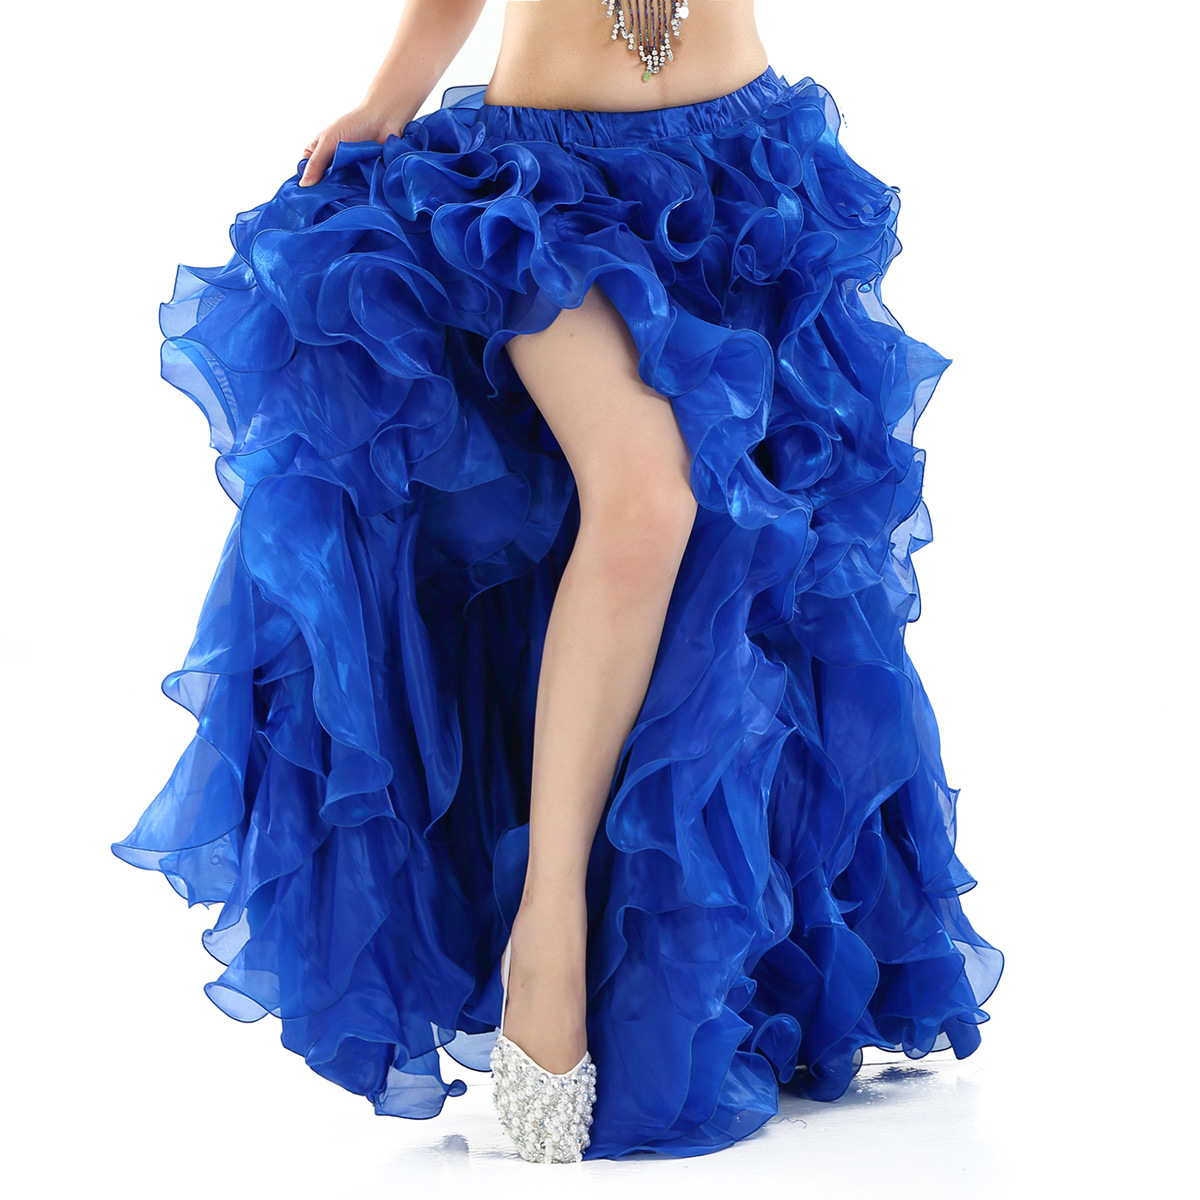 Belly Dance Skirt For Ladies More Colors length 96cm